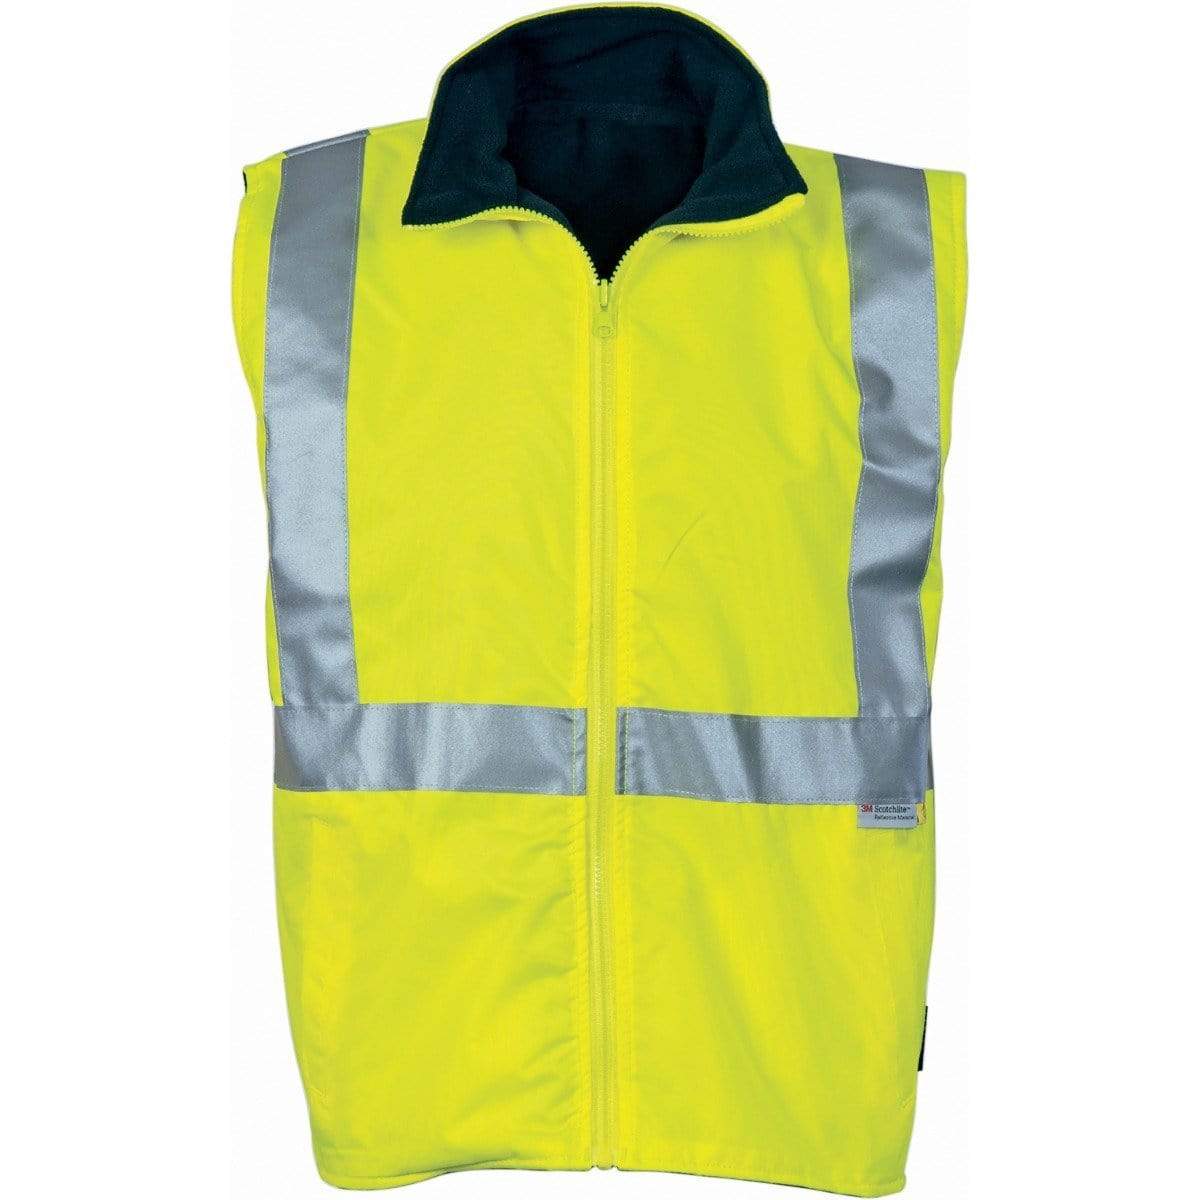 Hi-vis Reversible Vest With 3m Reflective Tape -yellow/navy-m - 3865 Work Wear DNC Workwear   